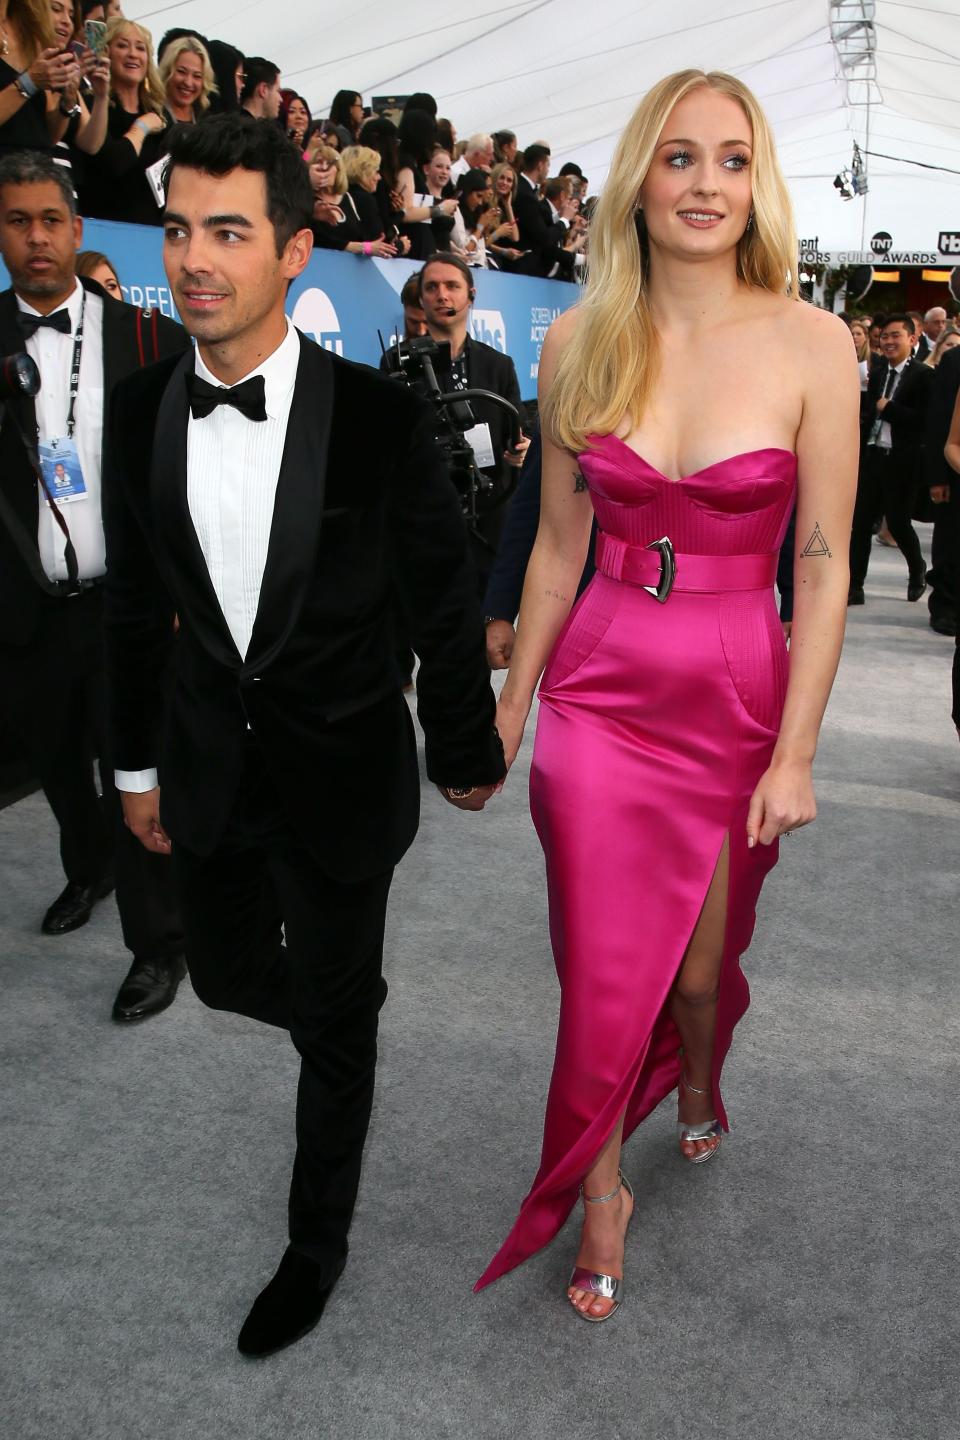 Sophie Turner and Joe Jonas arrive for the 26th Annual Screen Actors Guild Awards. (JEAN-BAPTISTE LACROIX via Getty Images)